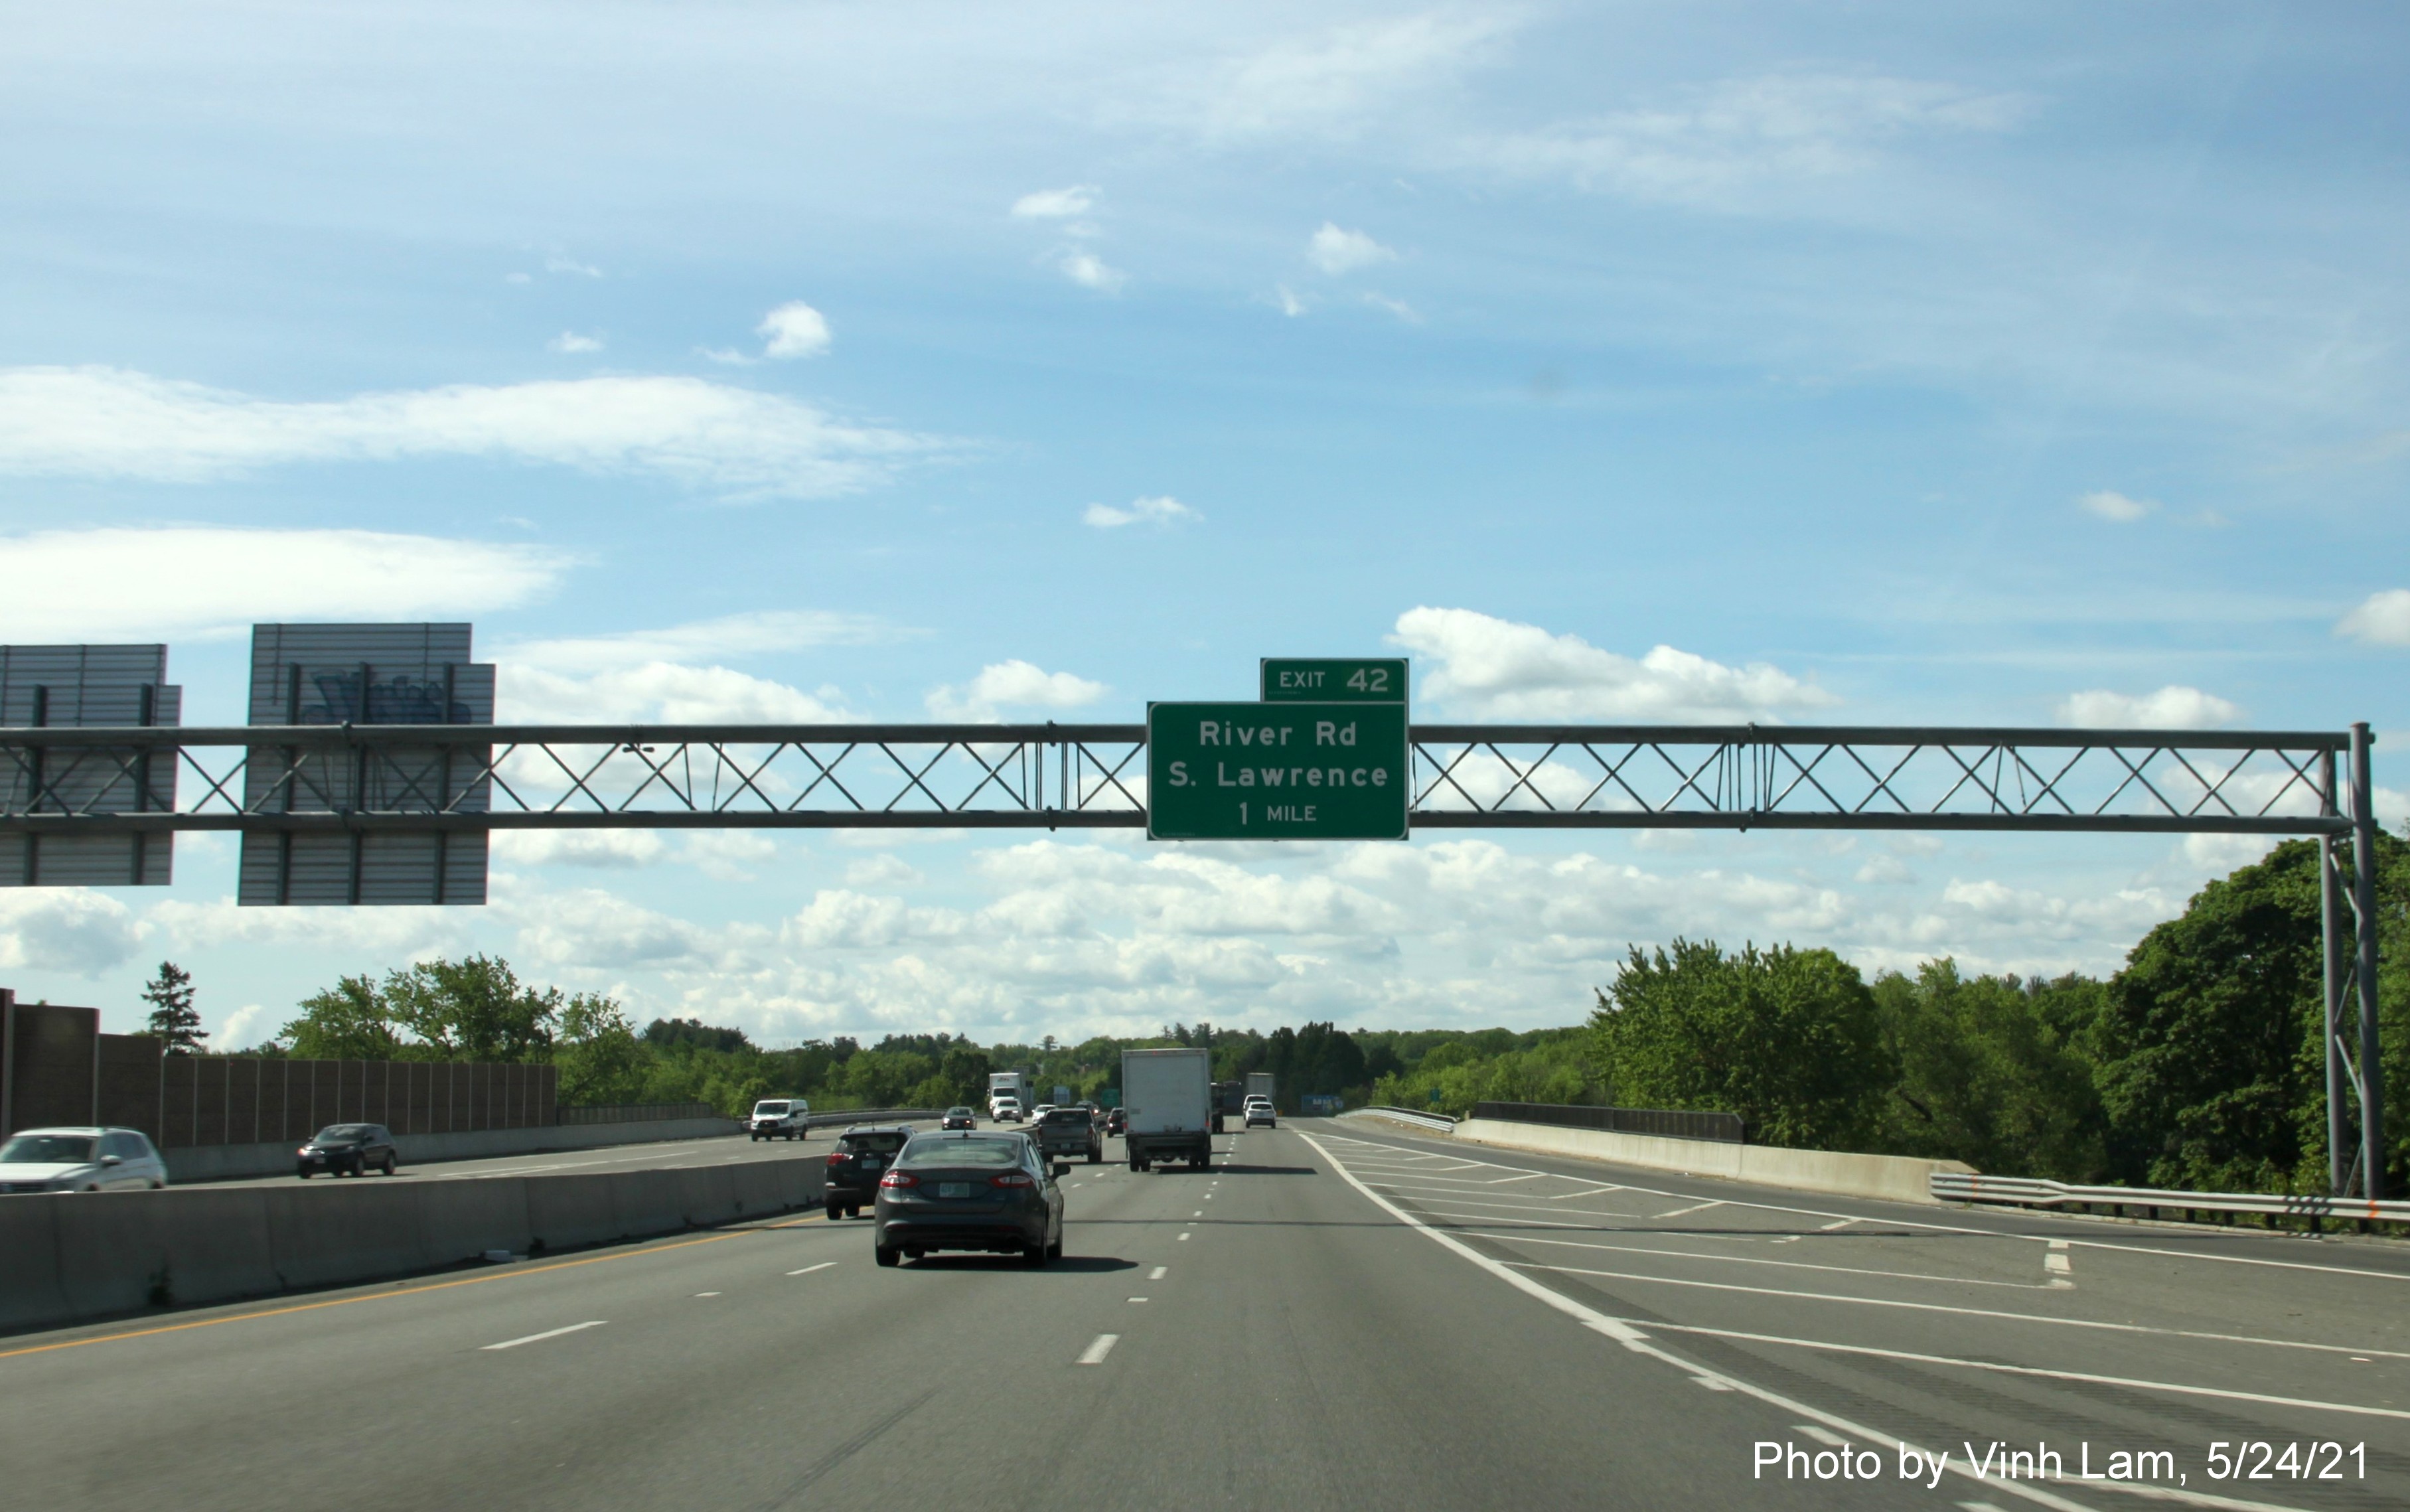 Image of 1 mile advance overhead sign for River Road exit with new milepost based exit number on I-93 South in Andover, by Vinh Lam, May 2021